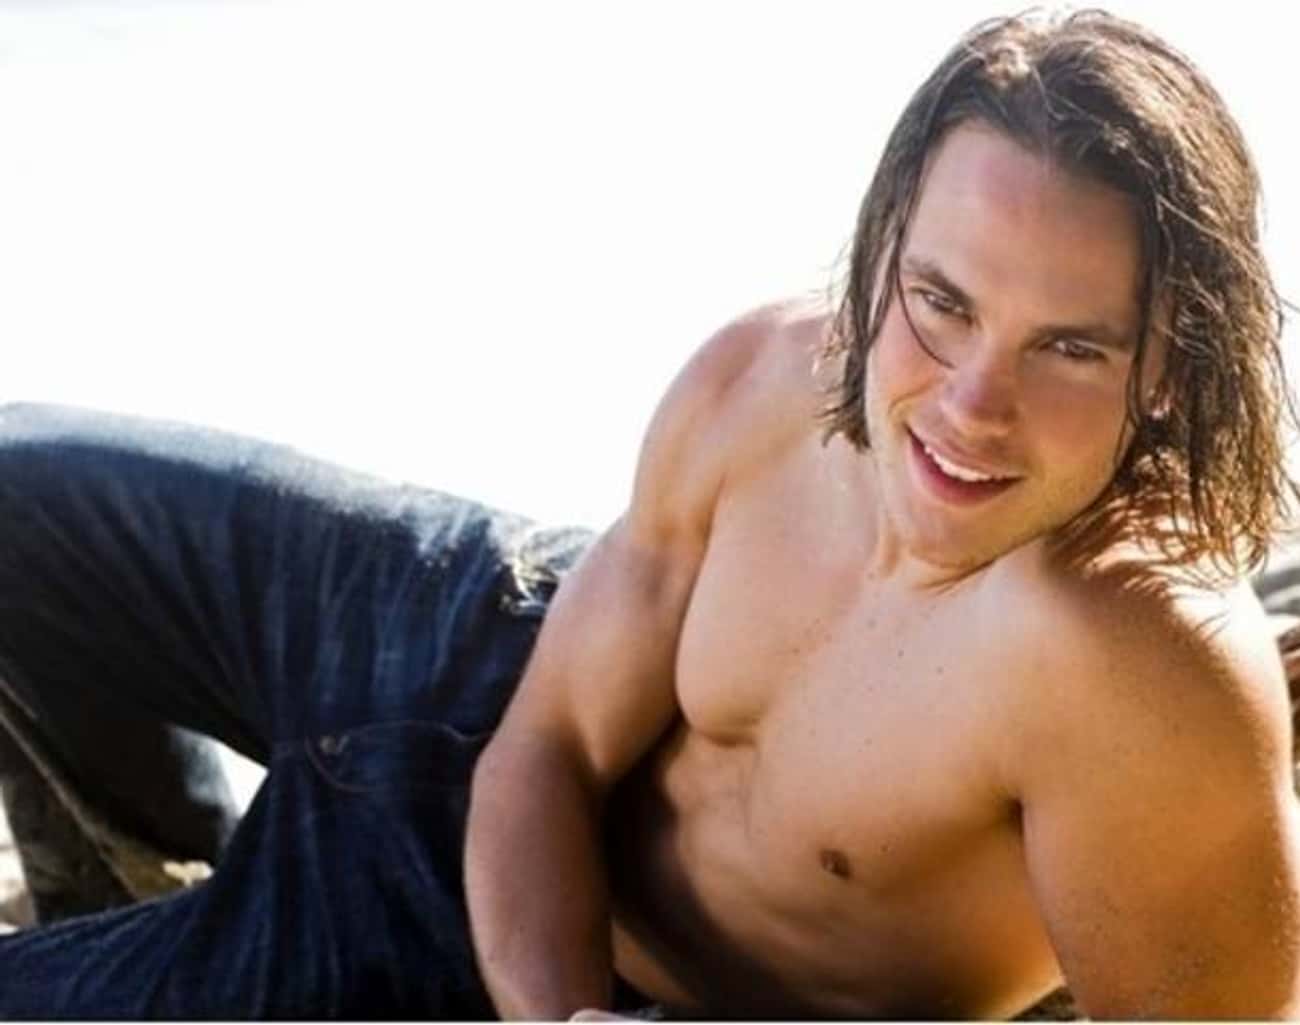 Taylor Kitsch in Shirtless Pose with Levis Pants